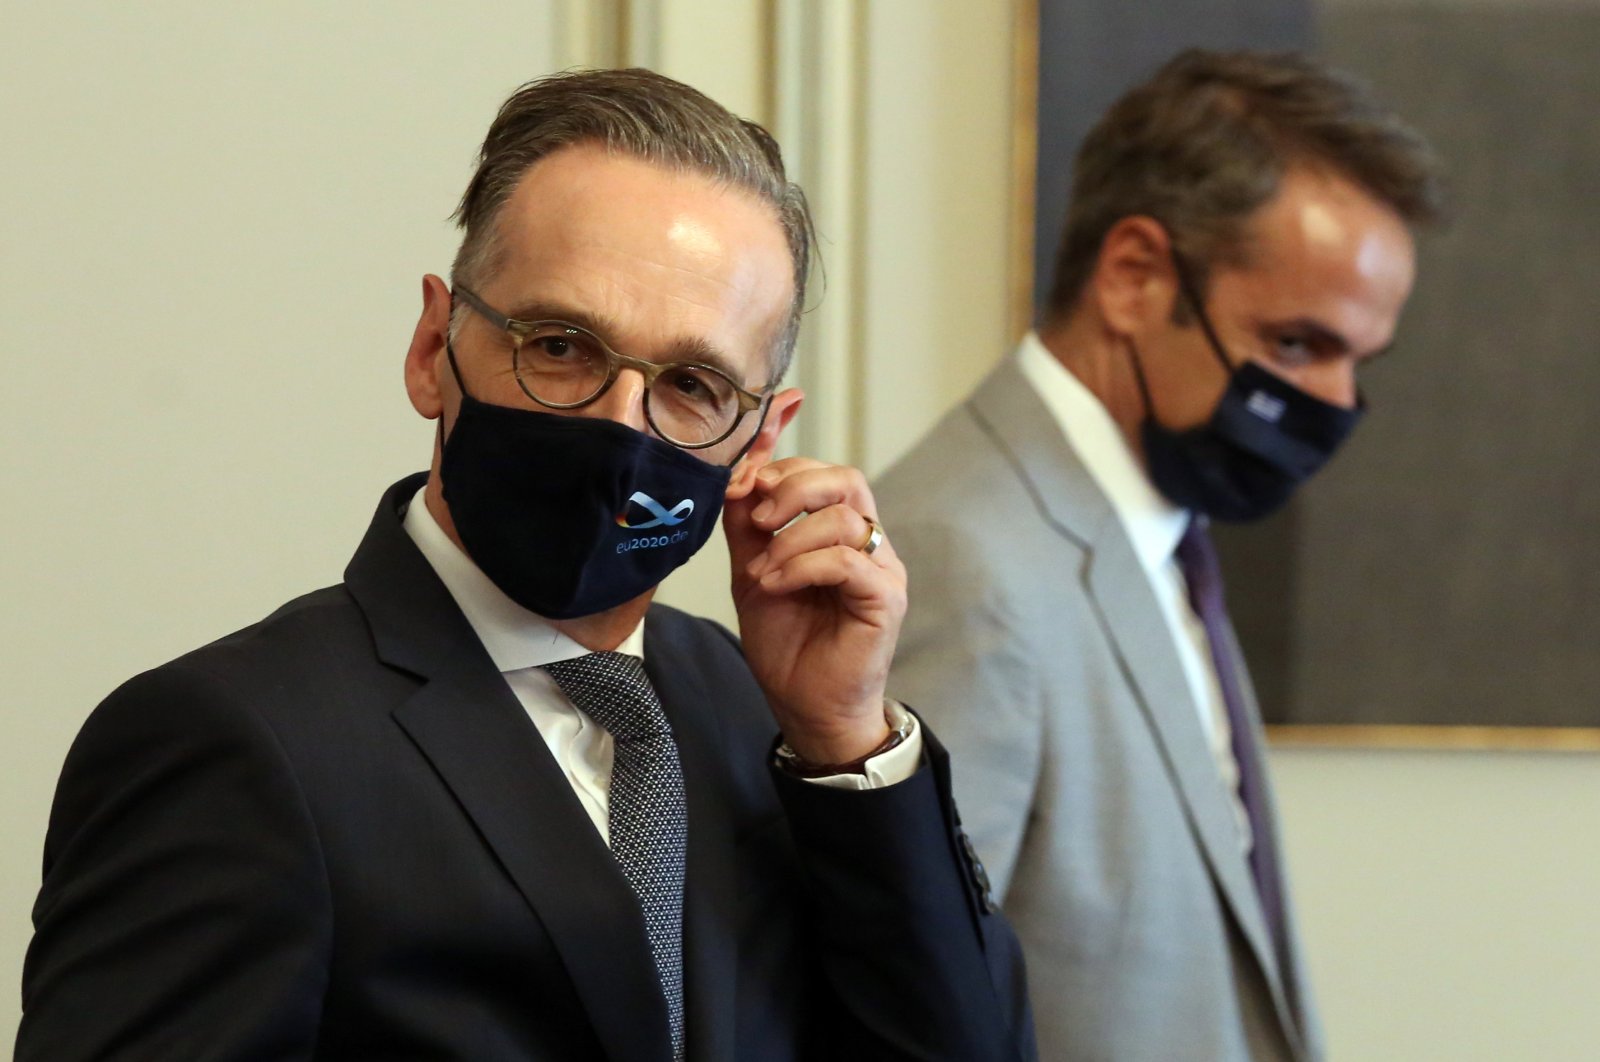 Foreign Minister of Germany Heiko Maas (L) takes off his mask during his meeting with Greek Prime Minister Kyriakos Mitsotakis (R), in Athens, Greece, Aug. 25, 2020. (EPA Photo)